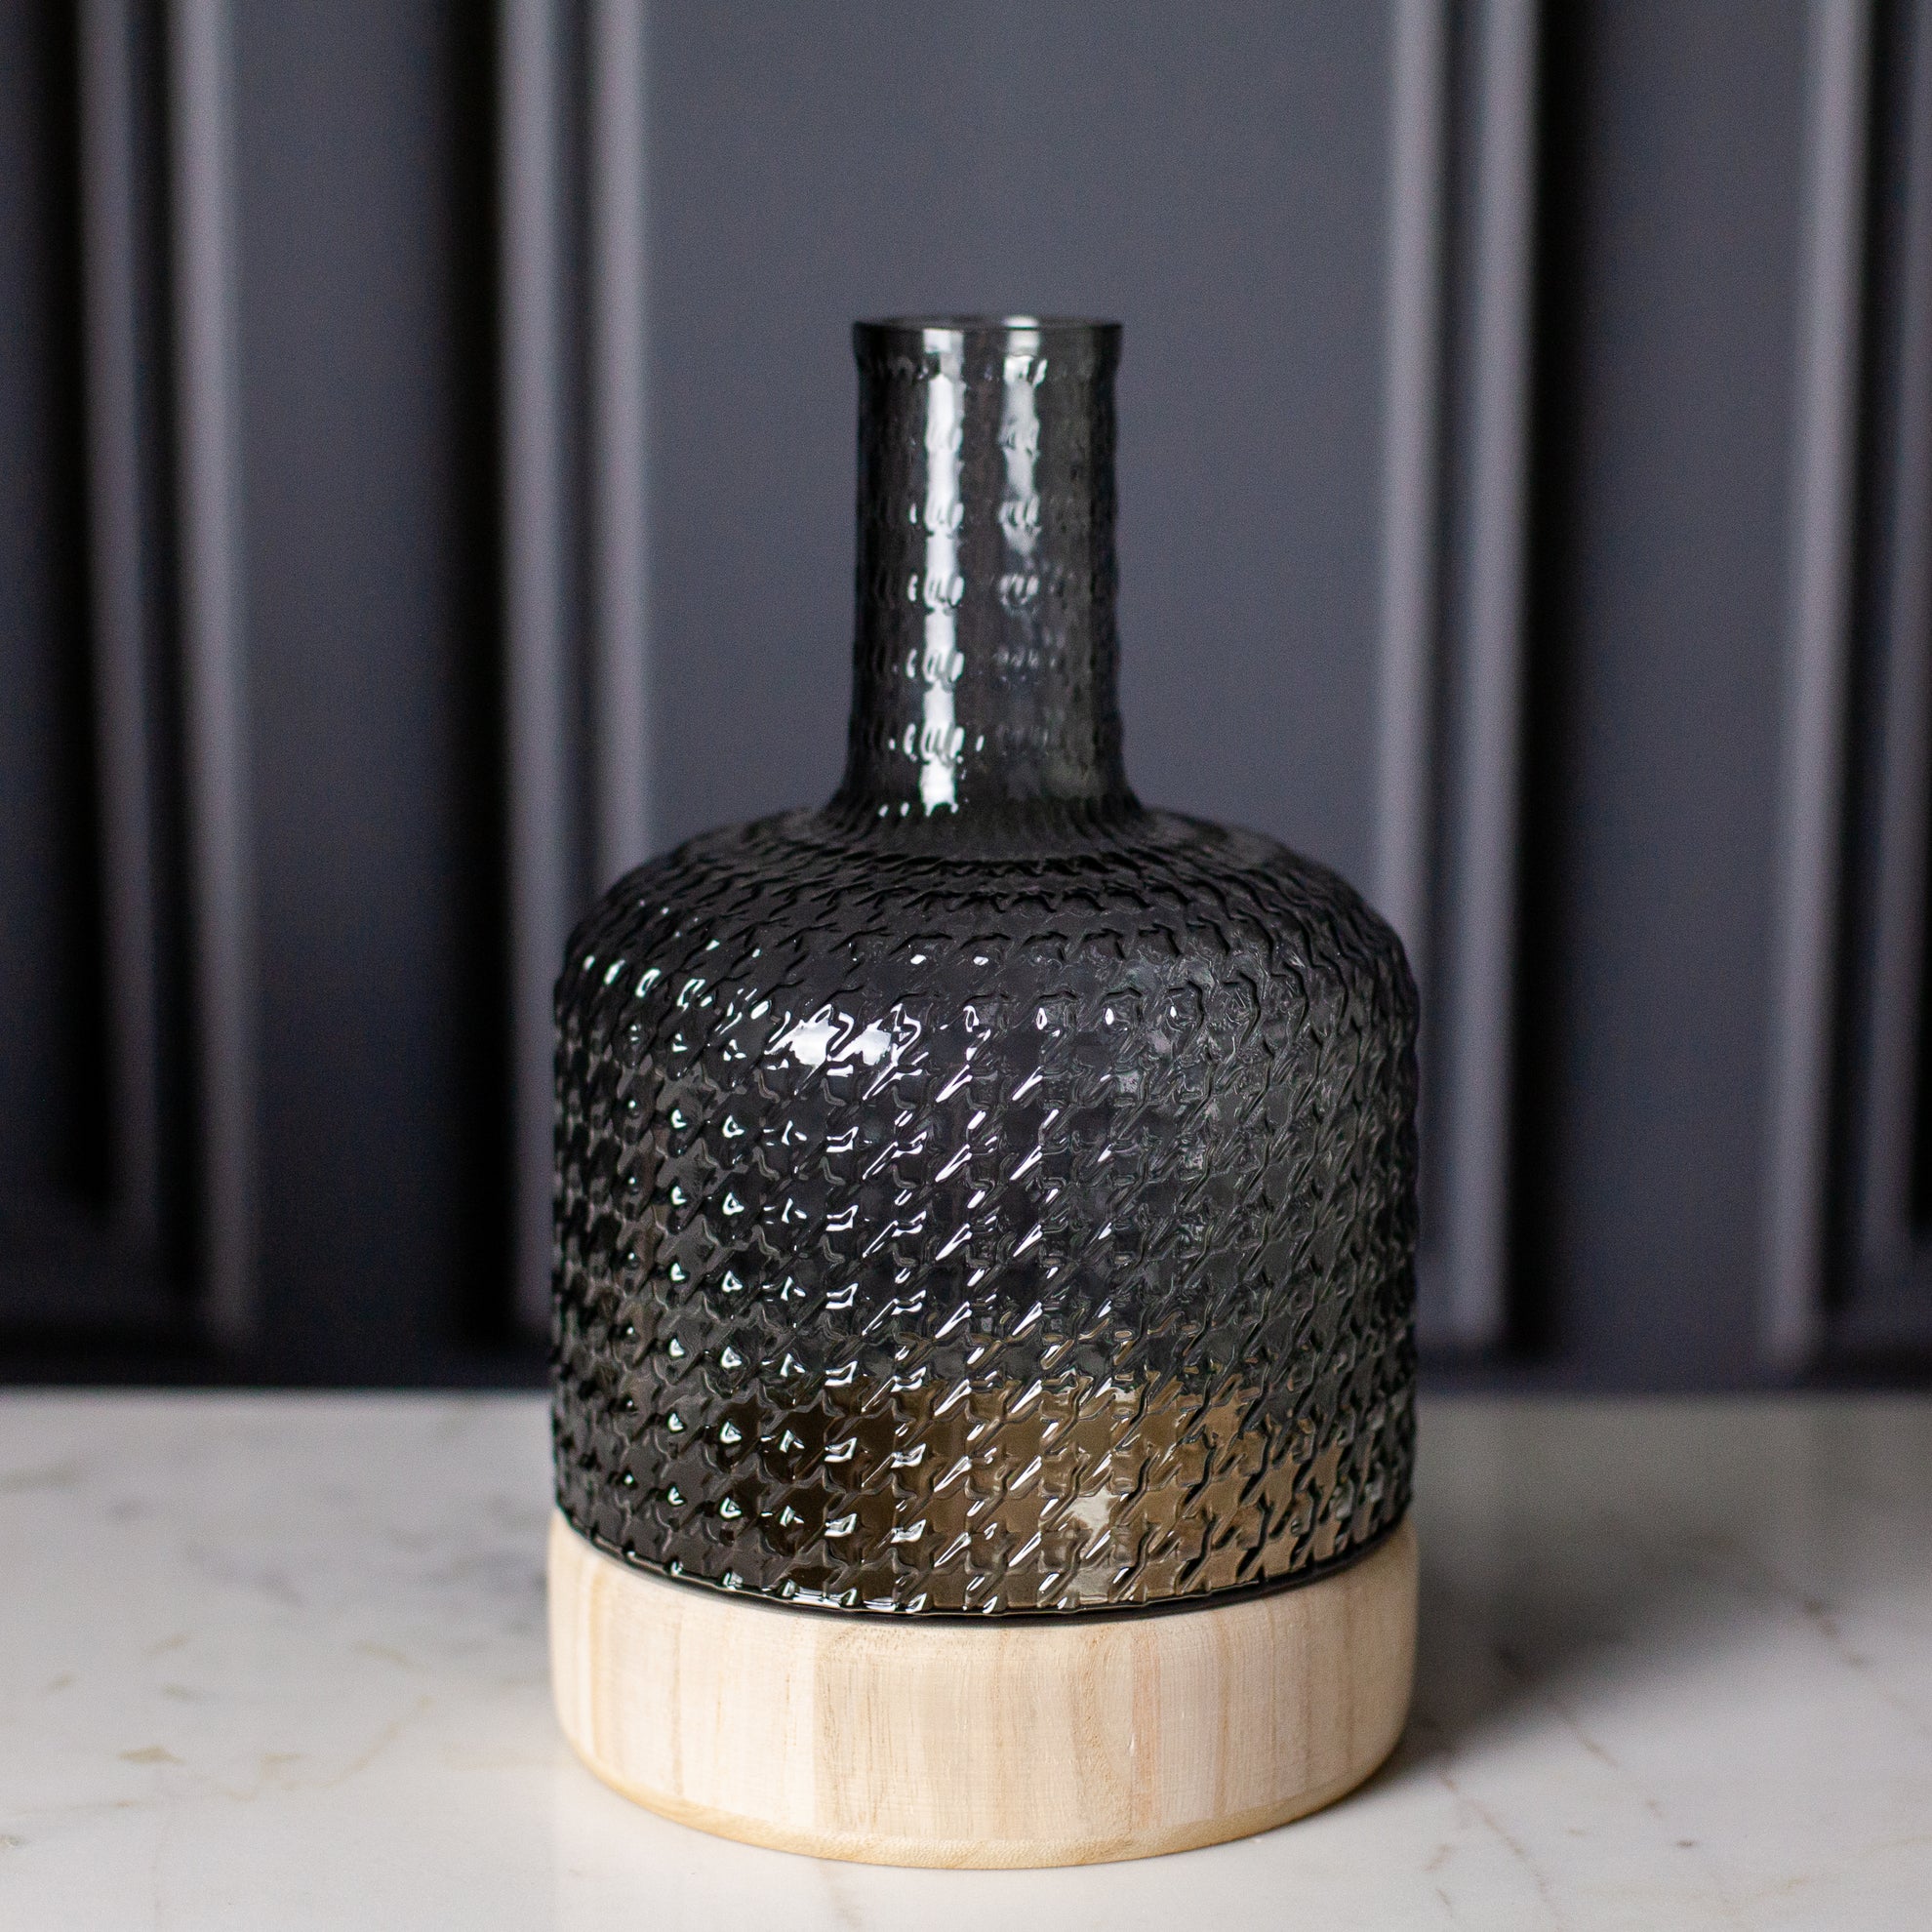 Textured Grey Glass Vase with Wood Base, 16.5